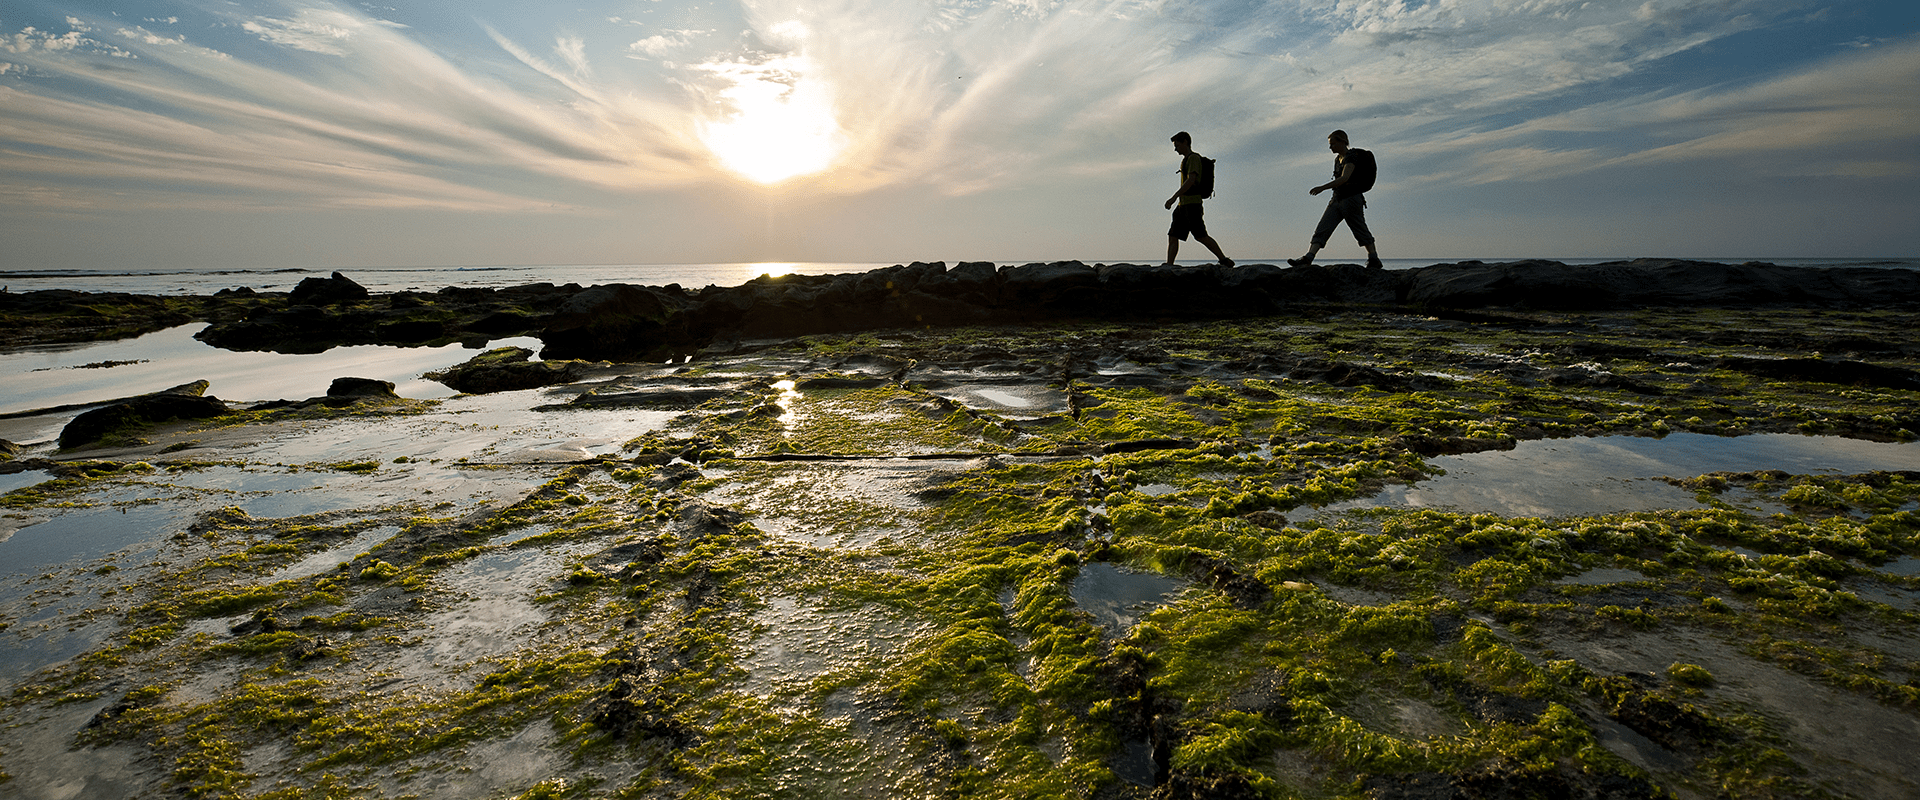 Two hikers walk across a rocky beach platform with a low sun behind them.